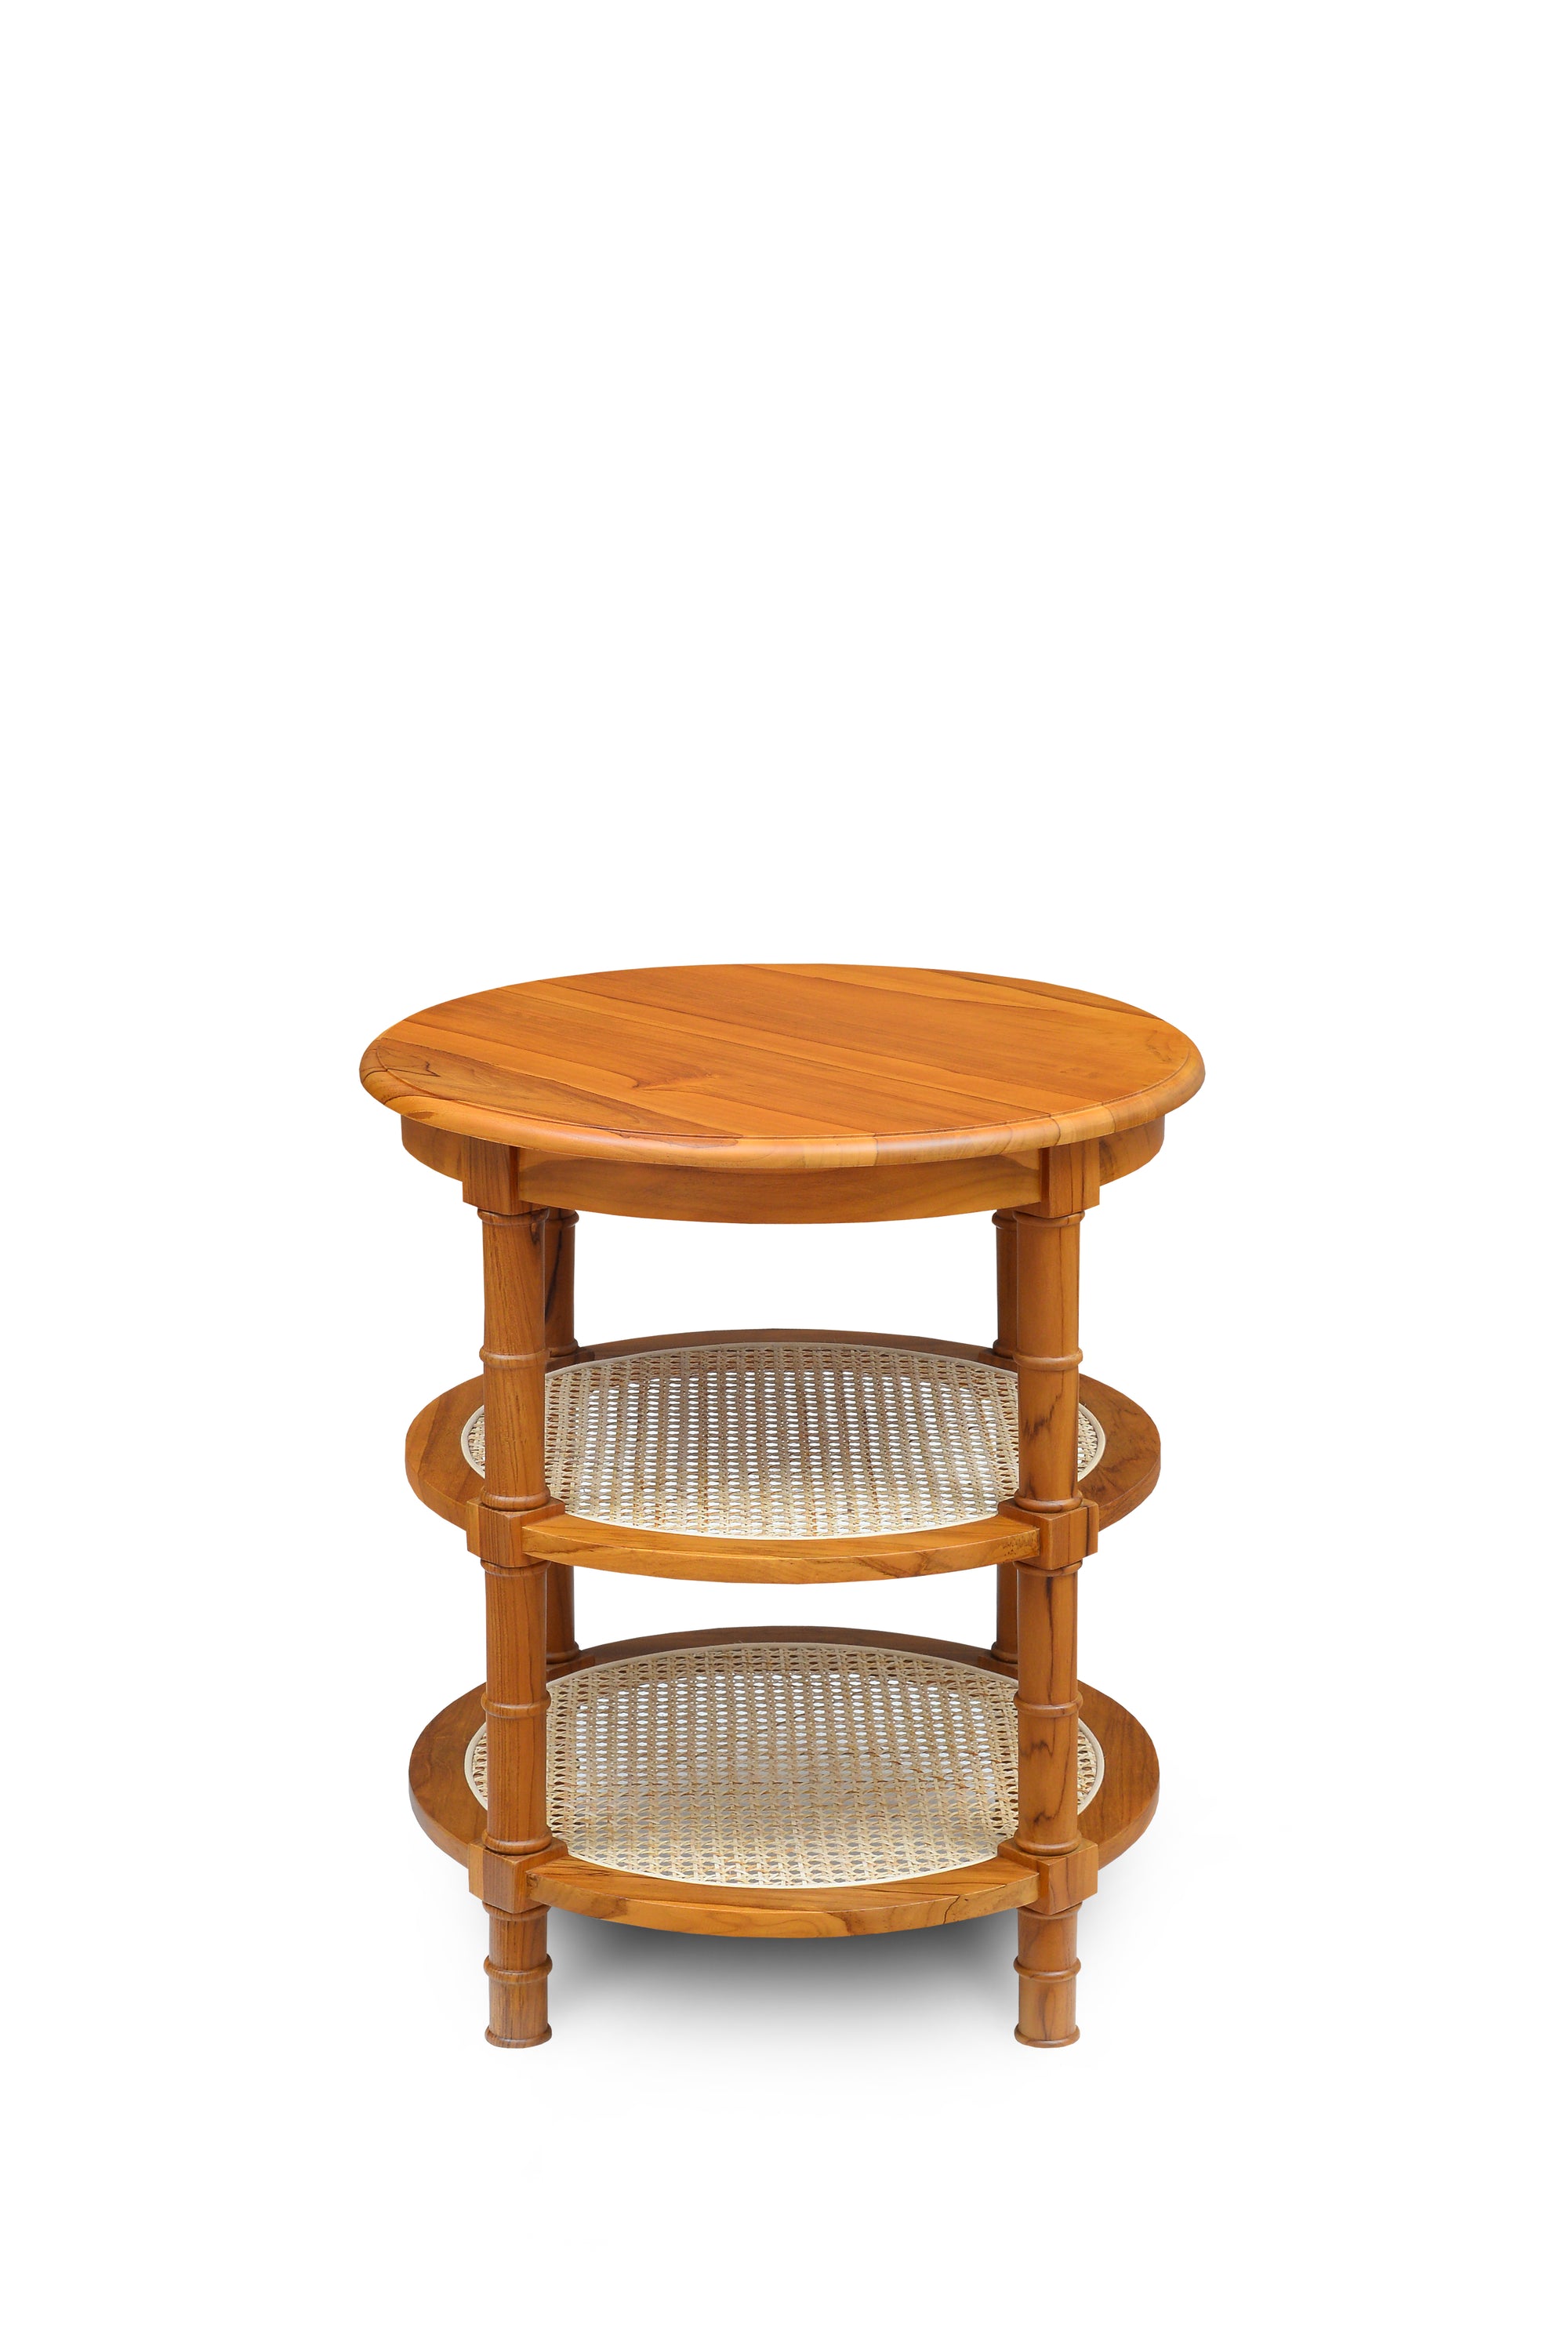 Round Teak Table with Cane Shelf Candy Brown Finish